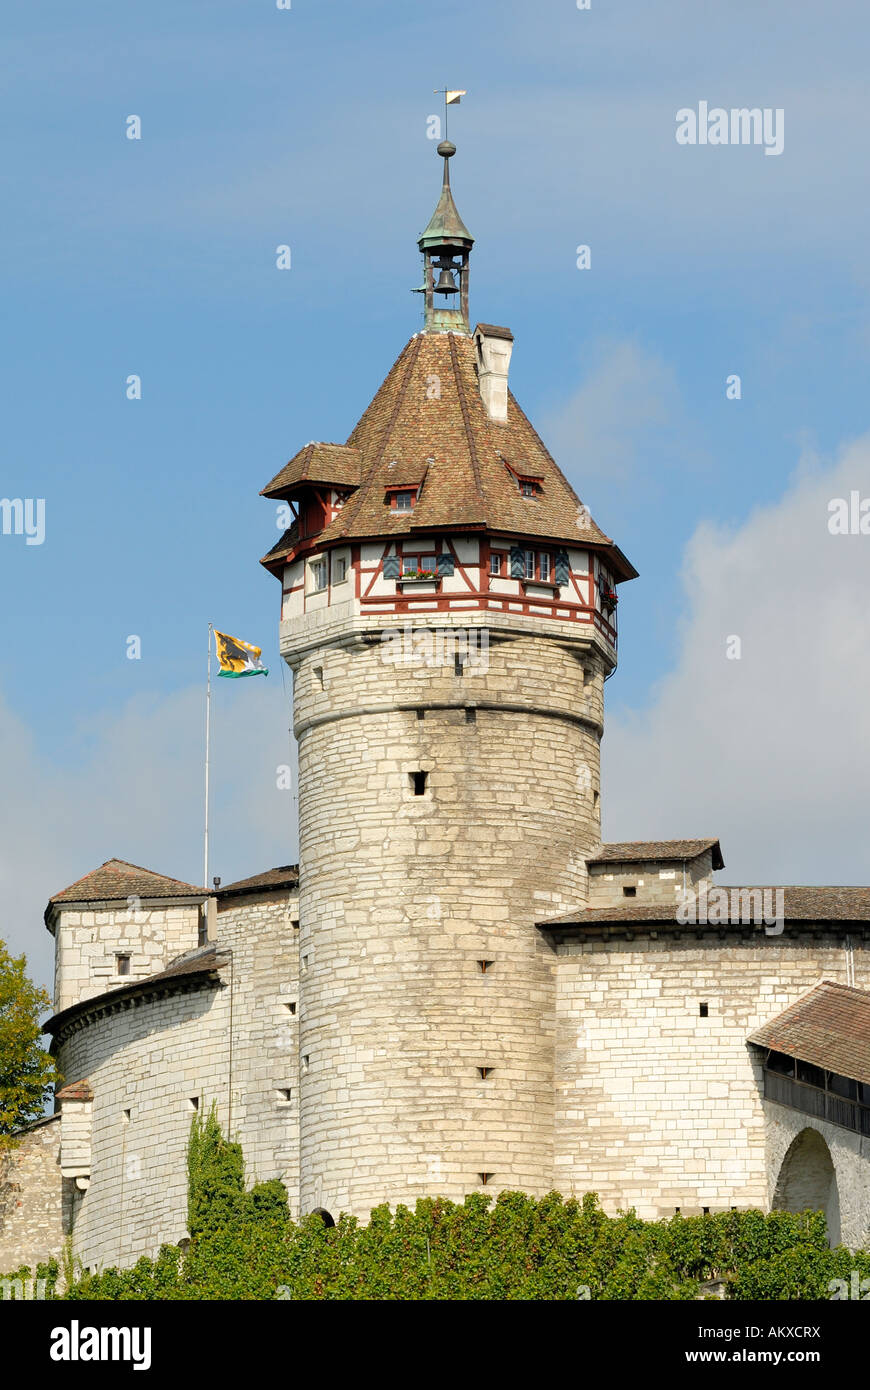 Schaffhausen - the tower from the munot castle - Switzerland, Europe. Stock Photo